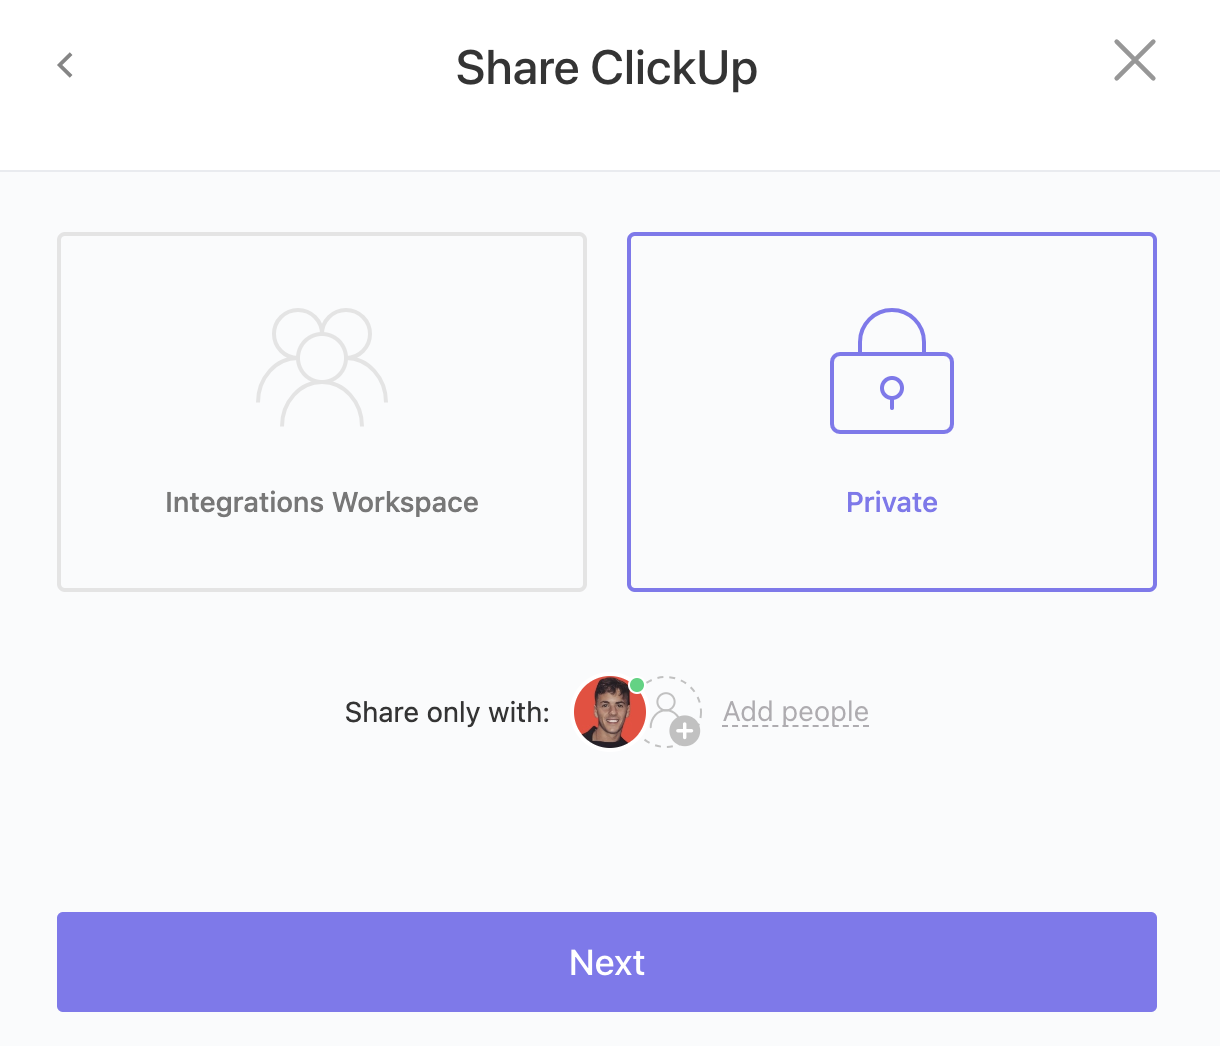 Screenshot of the Share ClickUp modal with the option to share the newly-created Space or with select people. The Private option is selected by default.